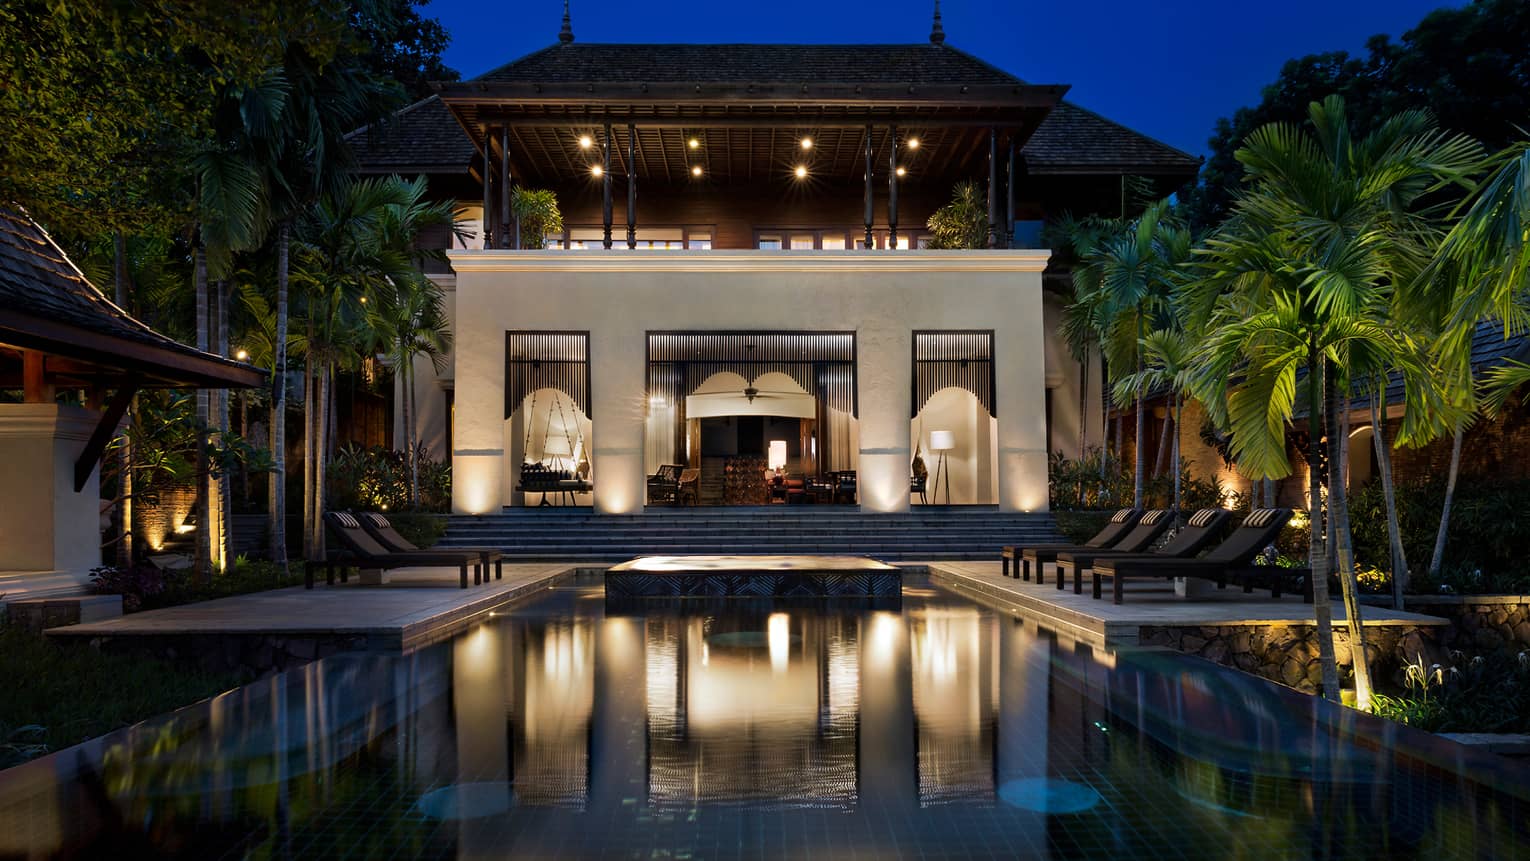 Large Four-Bedroom Residence Villa at night with lights, outdoor pool and palms 